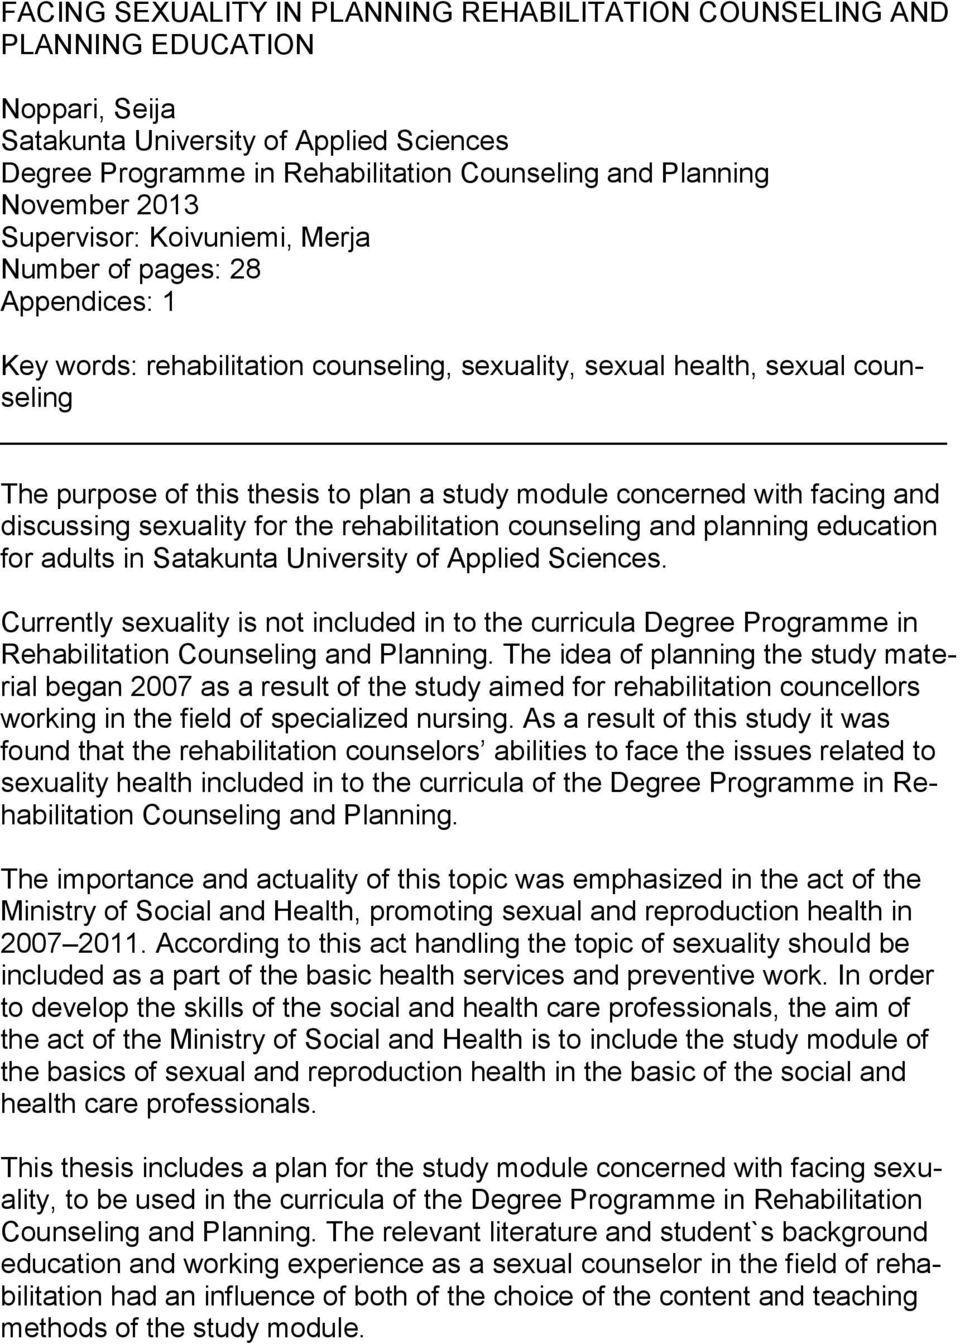 study module concerned with facing and discussing sexuality for the rehabilitation counseling and planning education for adults in Satakunta University of Applied Sciences.